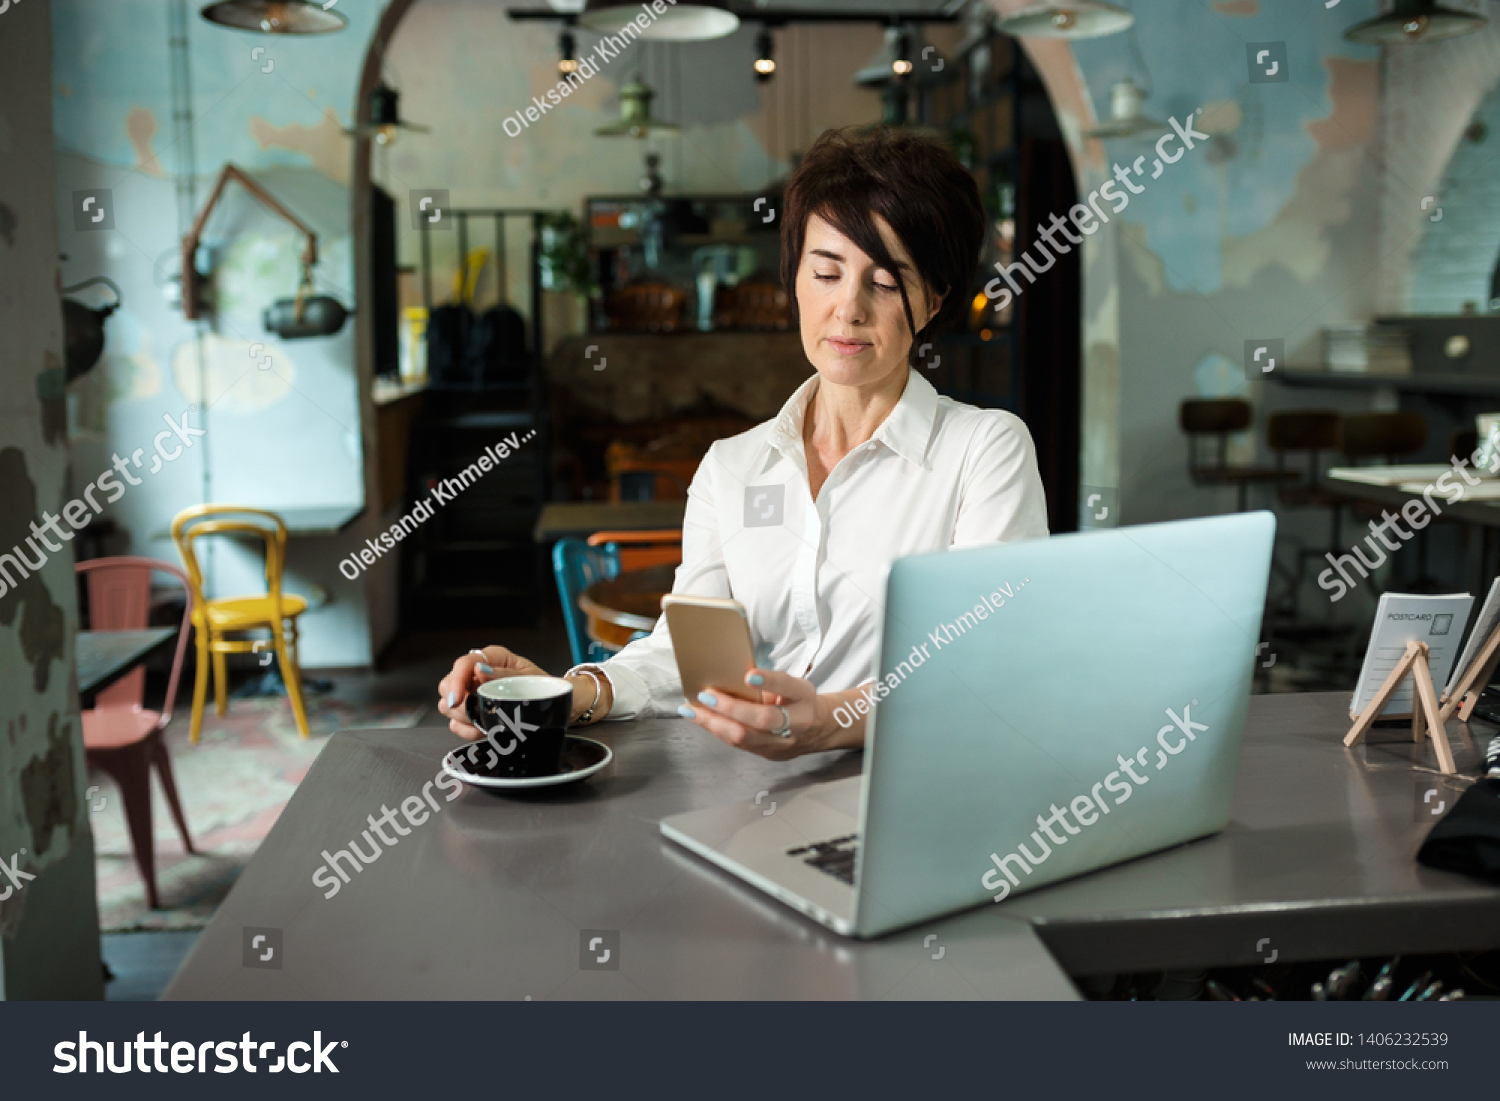 A middle-aged woman sits in a cafe, drinks coffee and works at a computer. Woman holding a phone #1406232539